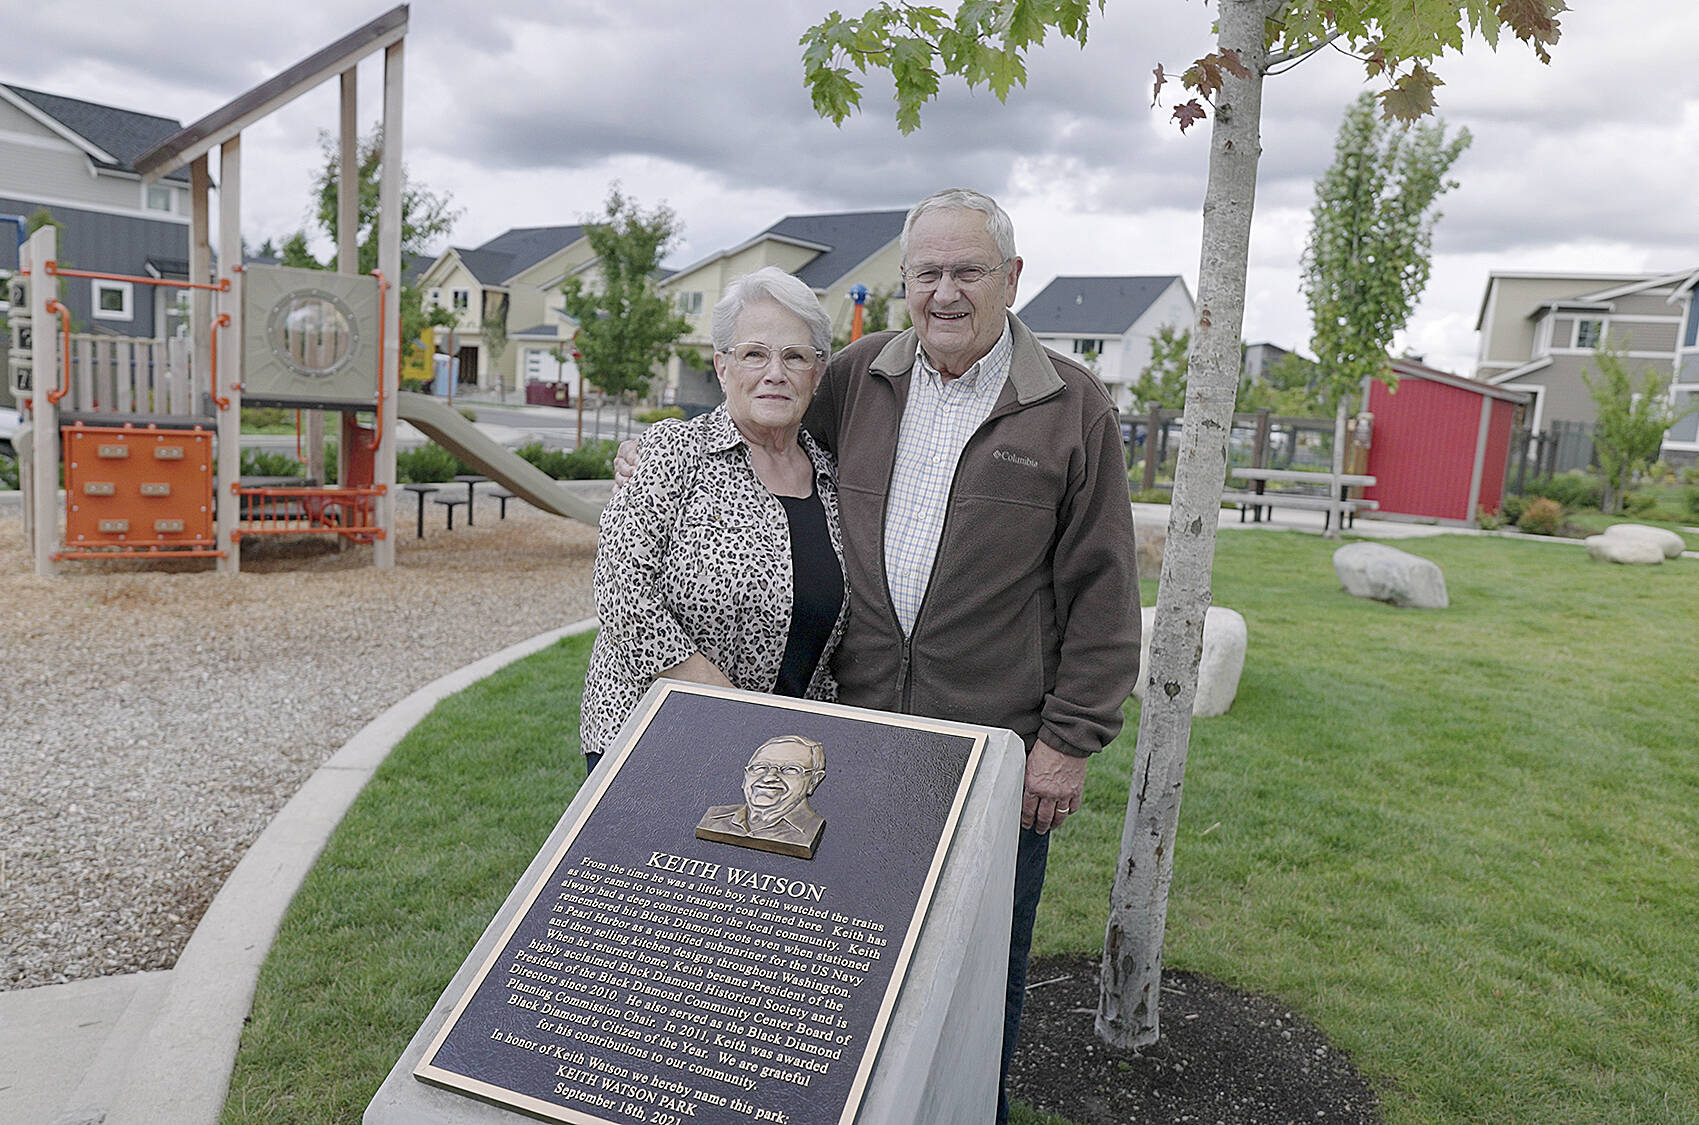 Courtesy photo 
Keith Watson and his wife Judy at the newly-renamed Keith Watson Park, located at the intersection of SE Cottonwood Street and Birch Ave SE. The plaque at the park gives a short history of Watson’s involvement in Black Diamond.